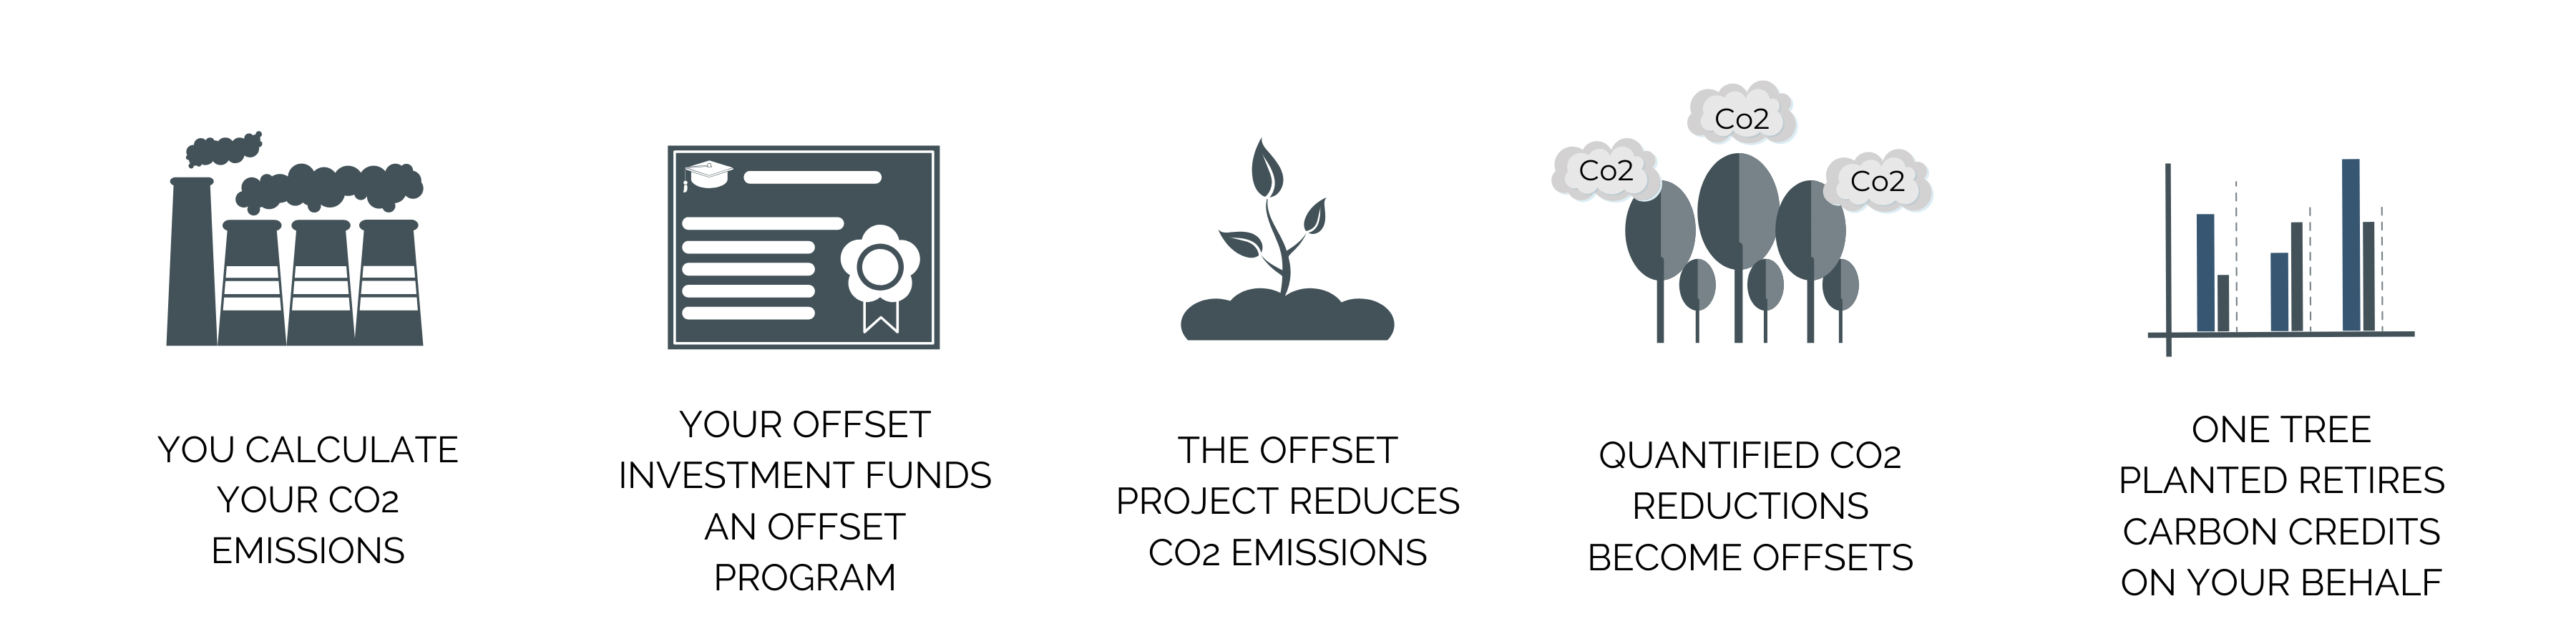 How to Offset Carbon Emissions